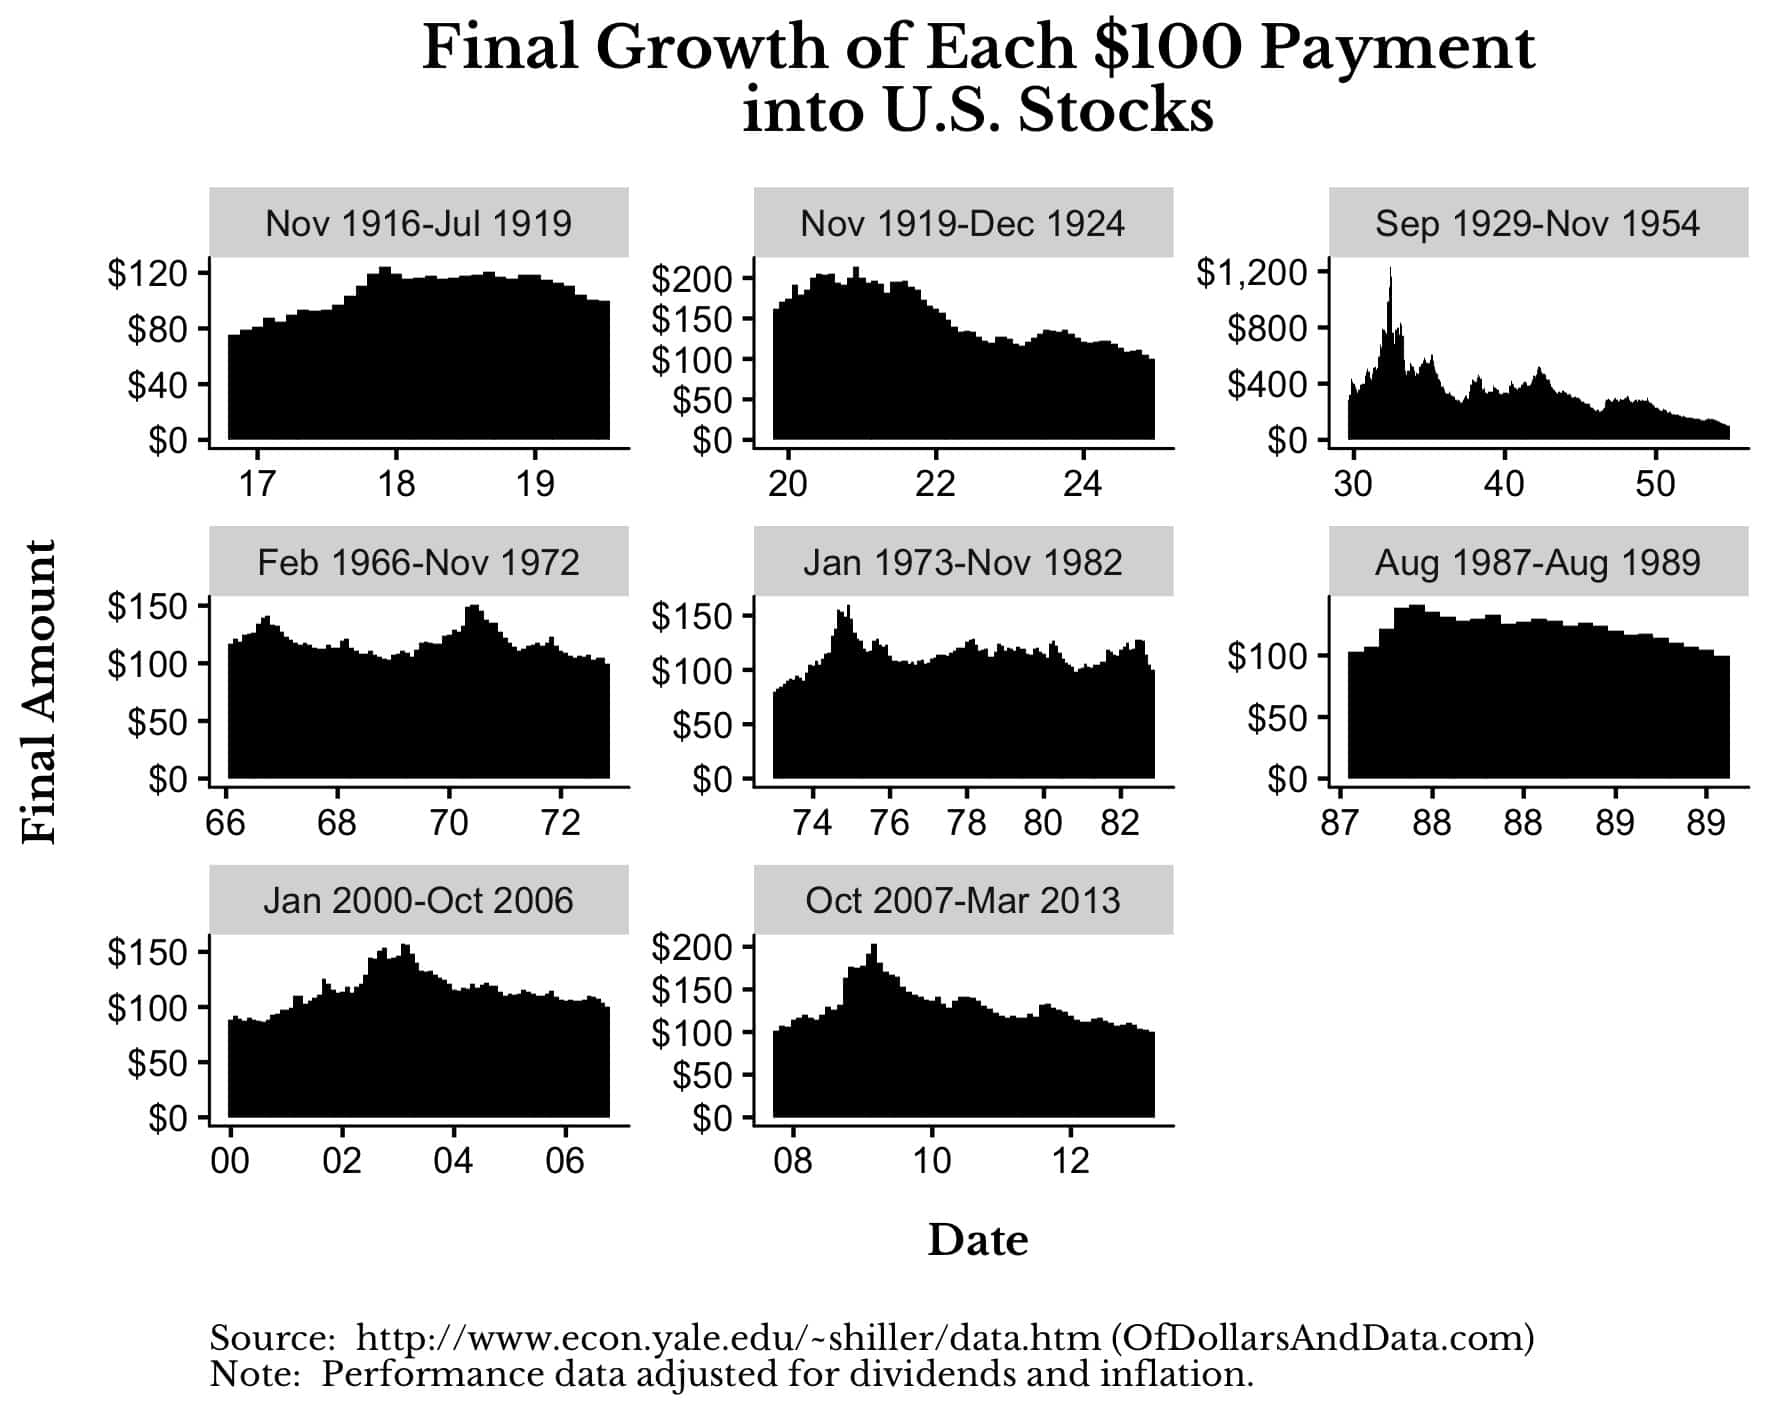 Final growth of each $100 payment over various time periods